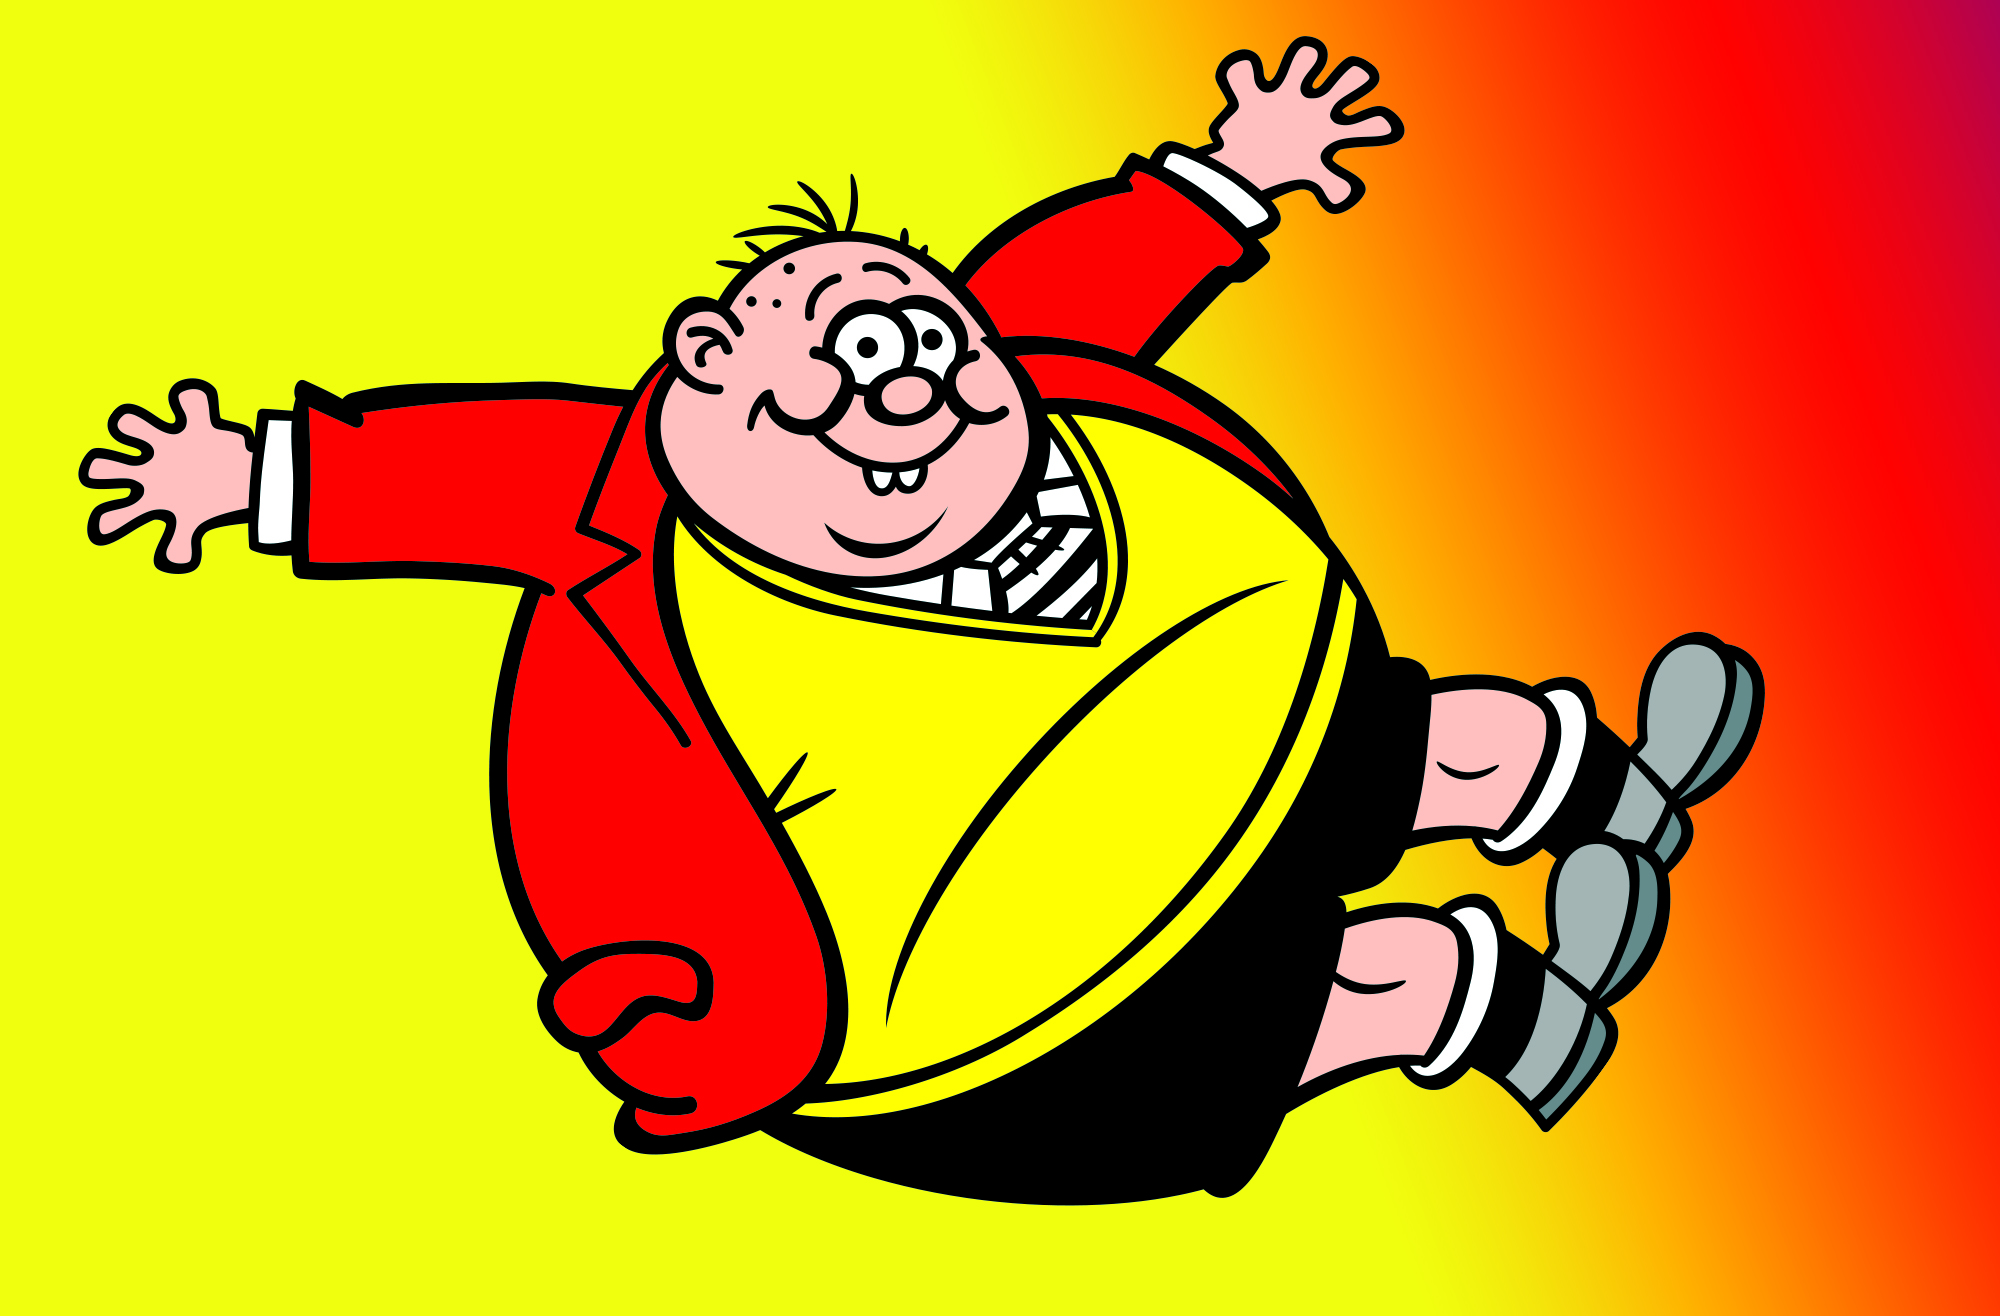 Freddy from the Bash Street Kids